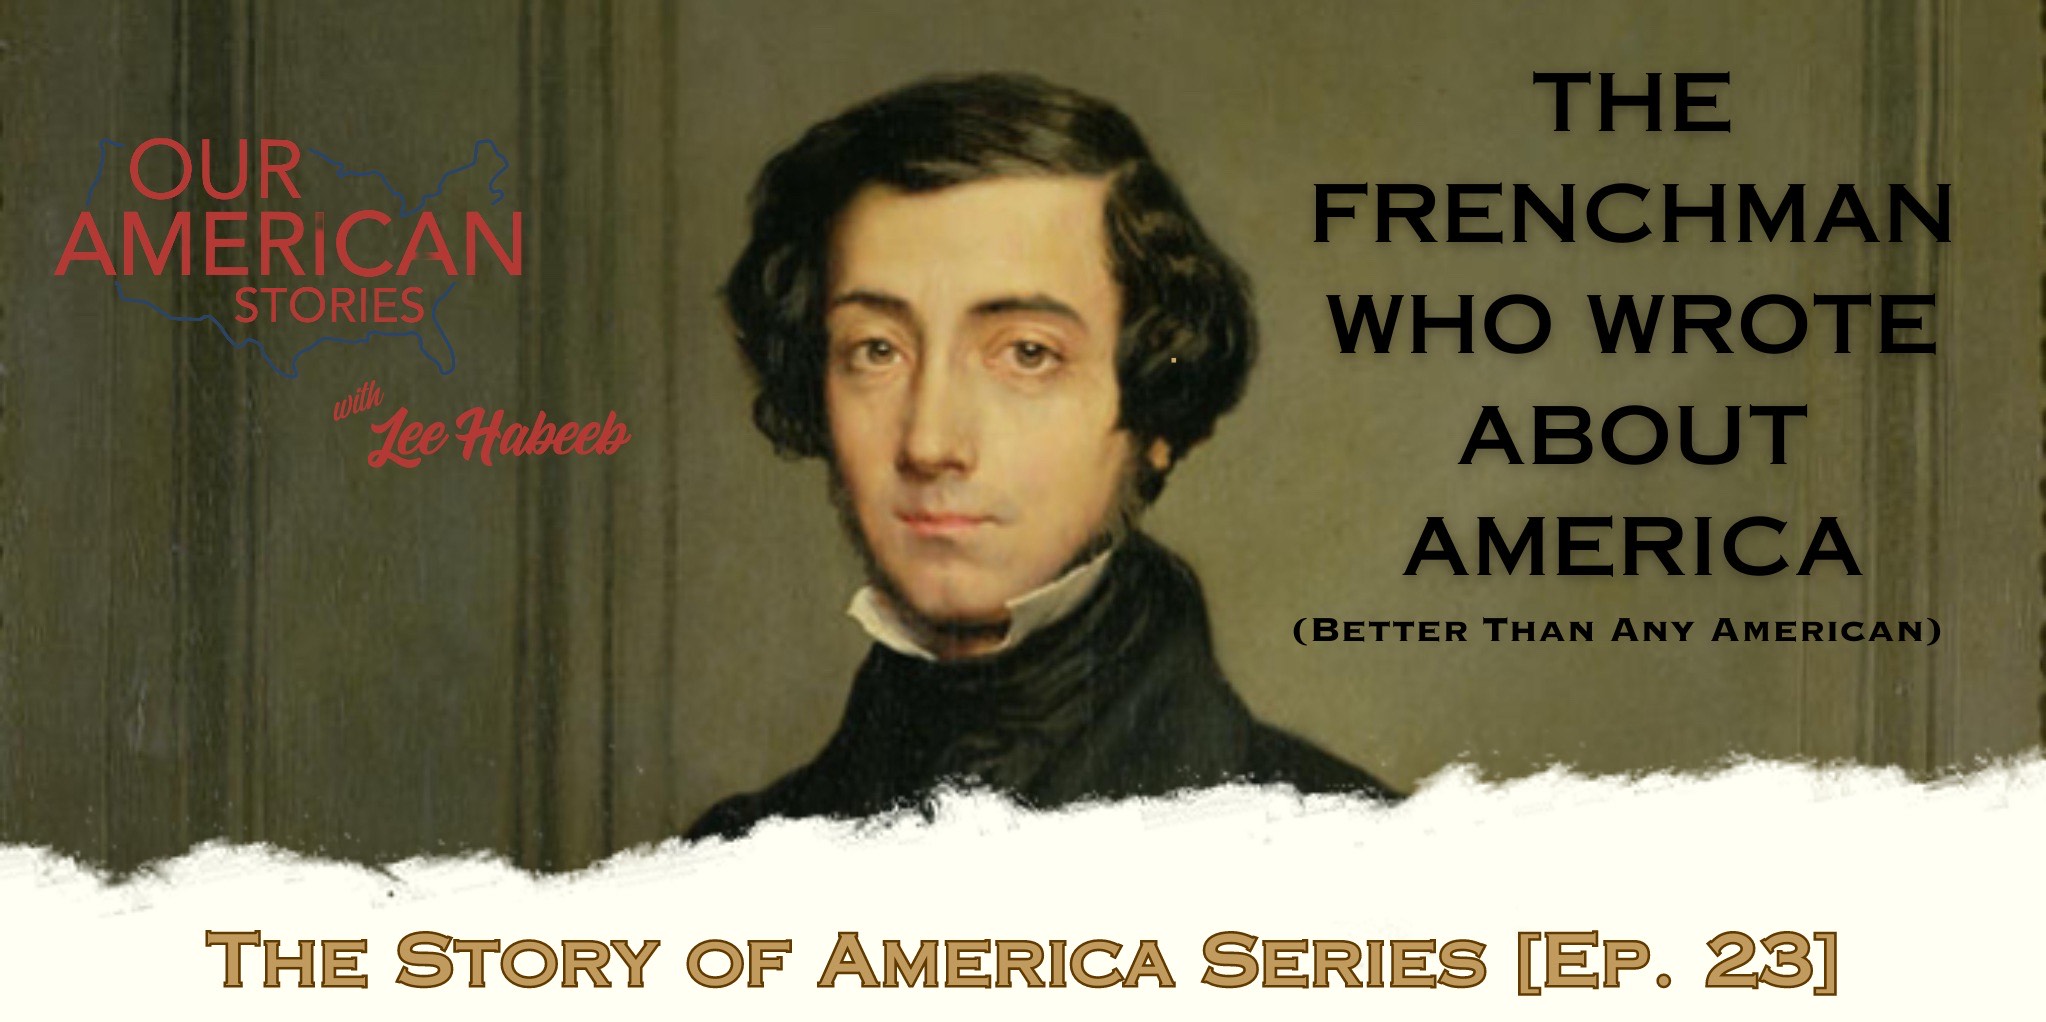 The Frenchman Who Wrote About America Better Than Any American: The Story of America Series [Ep. 23]